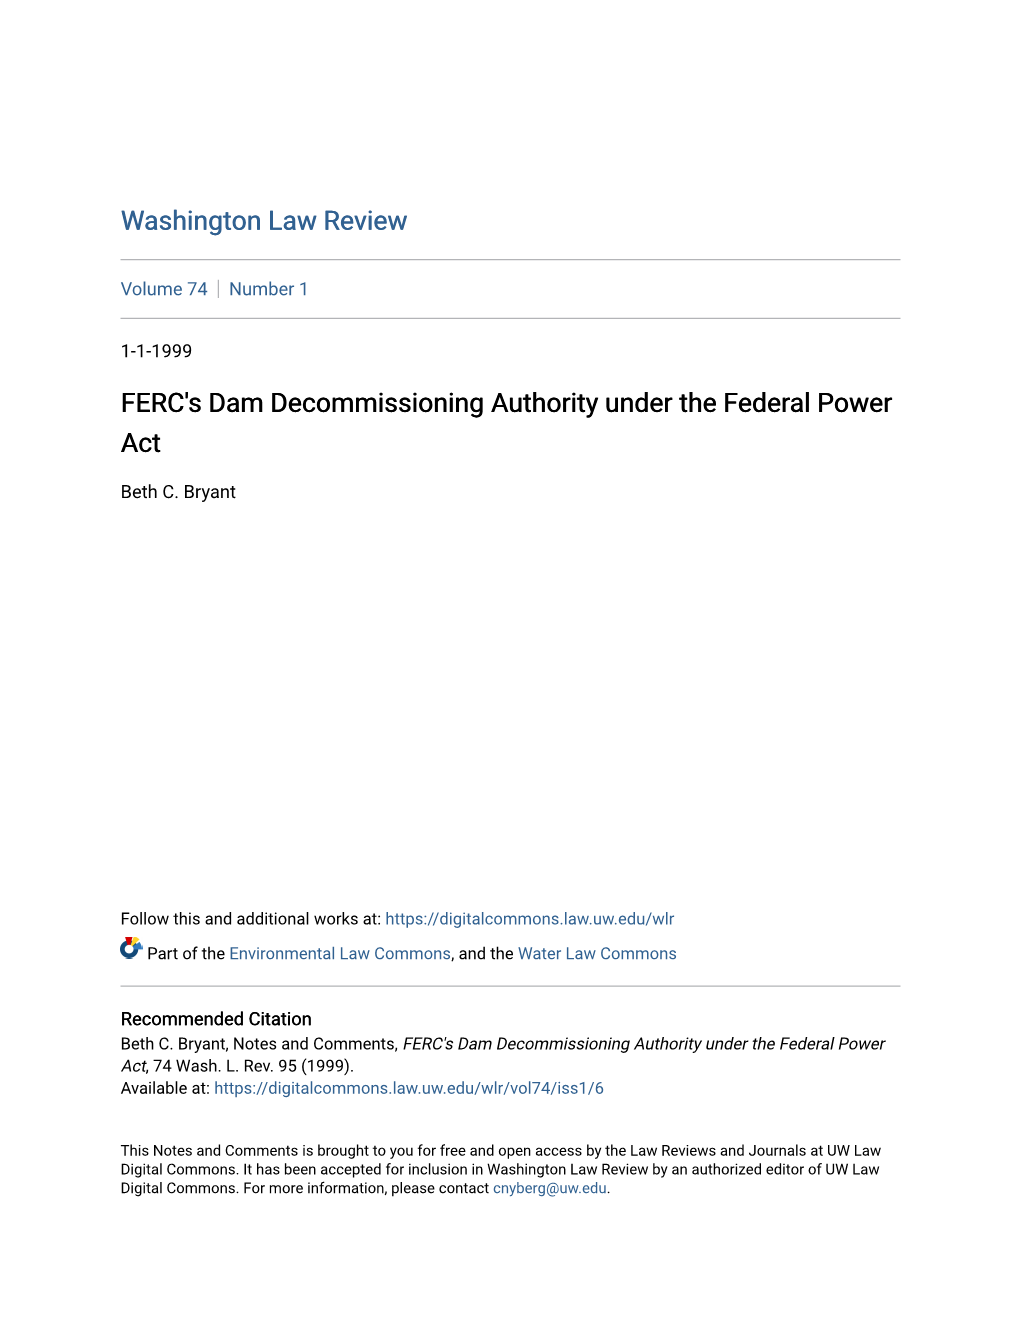 FERC's Dam Decommissioning Authority Under the Federal Power Act